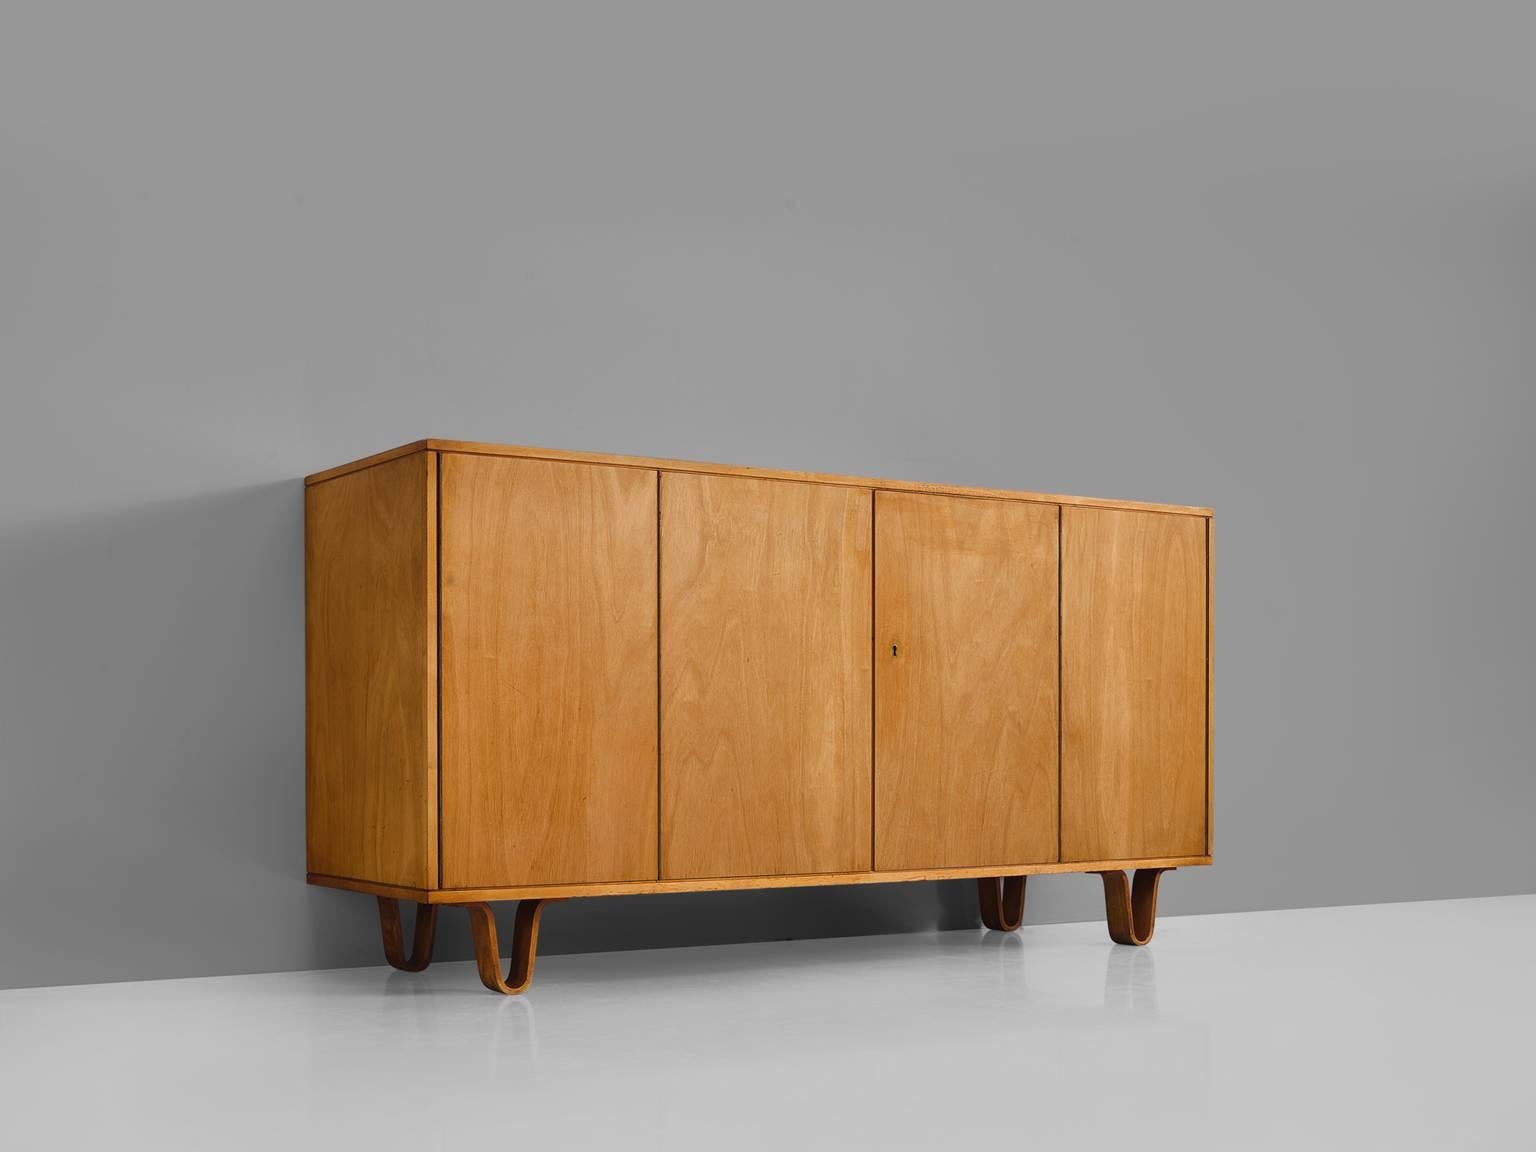 Cees Braakman for UMS Pastoe, sideboard model DB 02, birchwood veneer, Netherlands, 1950s.

This cabinet is executed in birch veneer and is designed by Cees Braakman for Pastoe. The distinctive feature of this four-door highboard is the theatrical